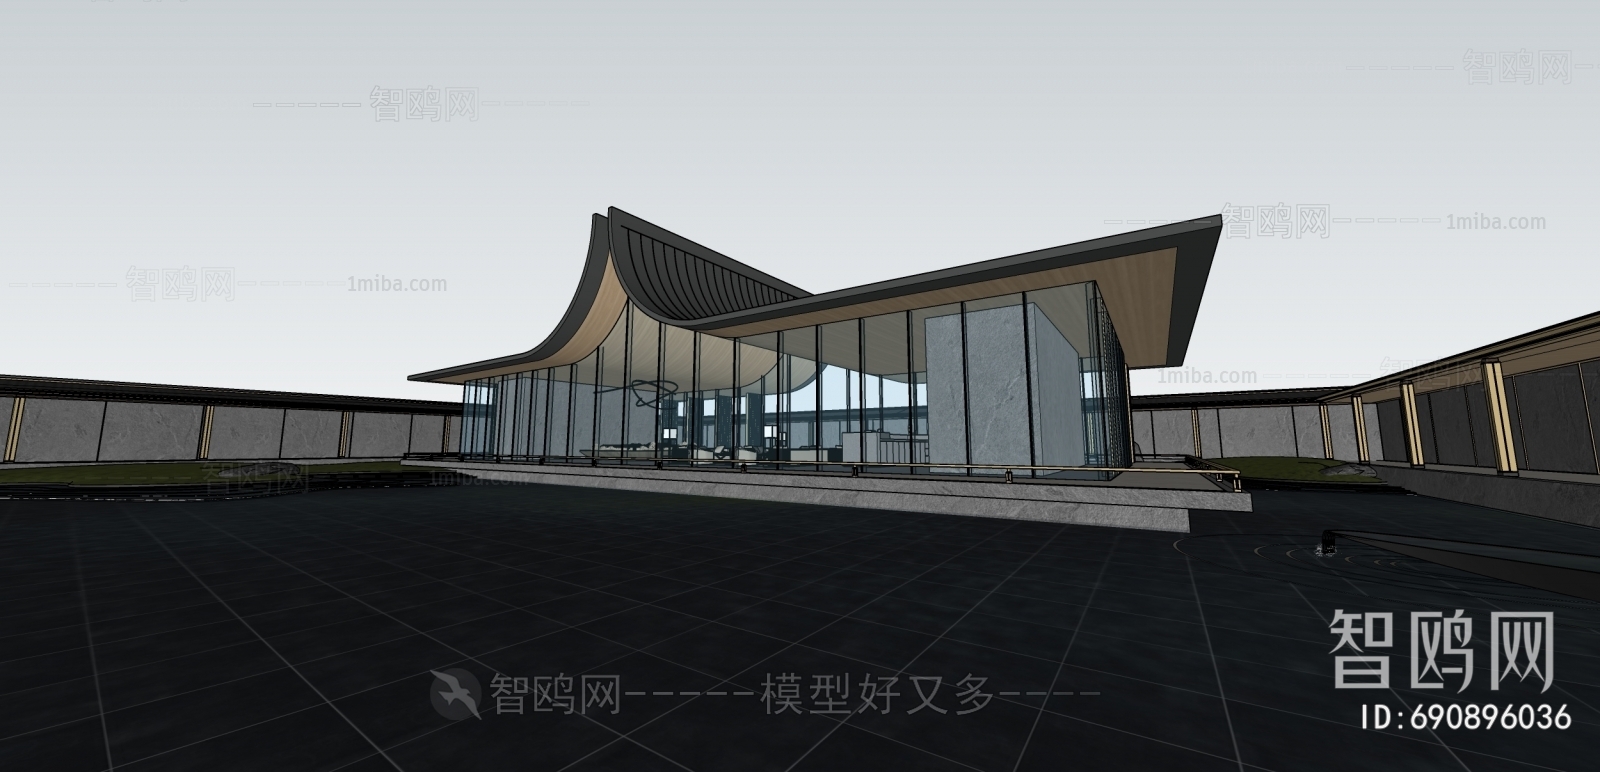 New Chinese Style Appearance Of Commercial Building